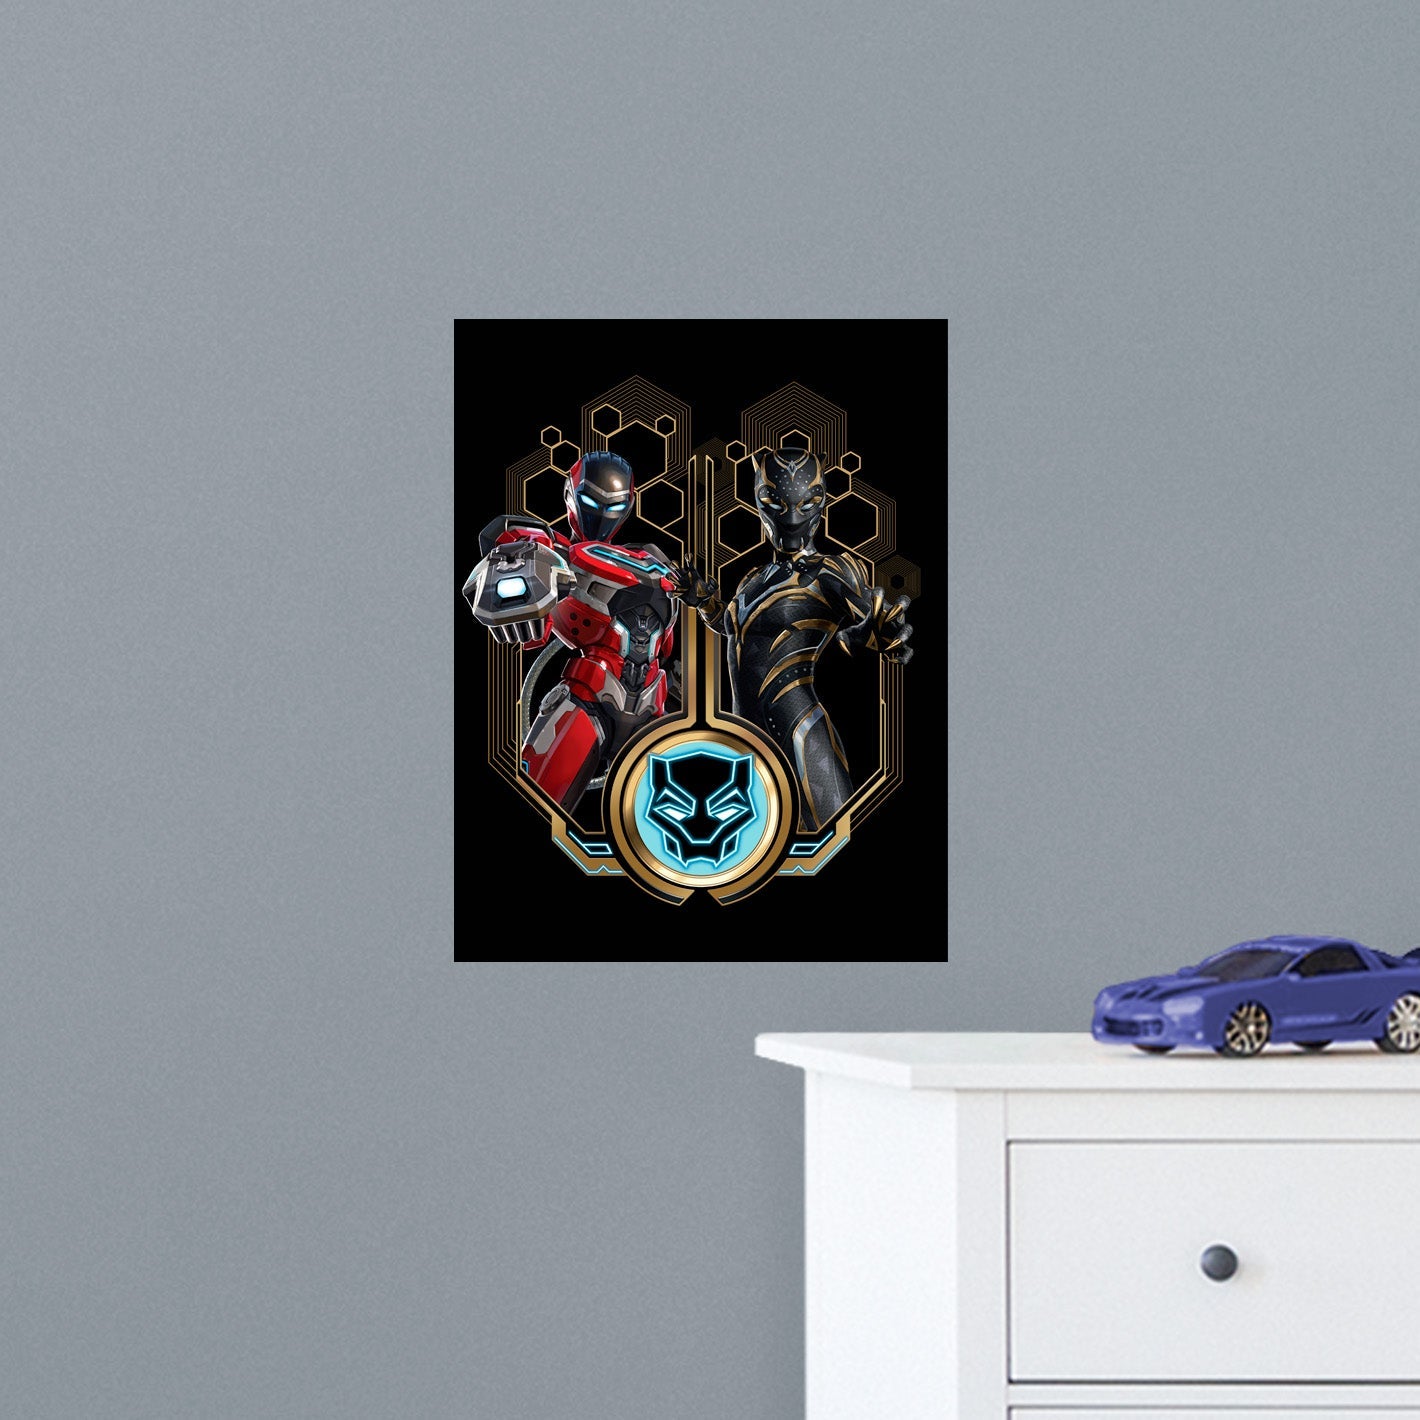 Black Panther Wakanda Forever: Black Panther & Ironheart Poster - Officially Licensed Marvel Removable Adhesive Decal